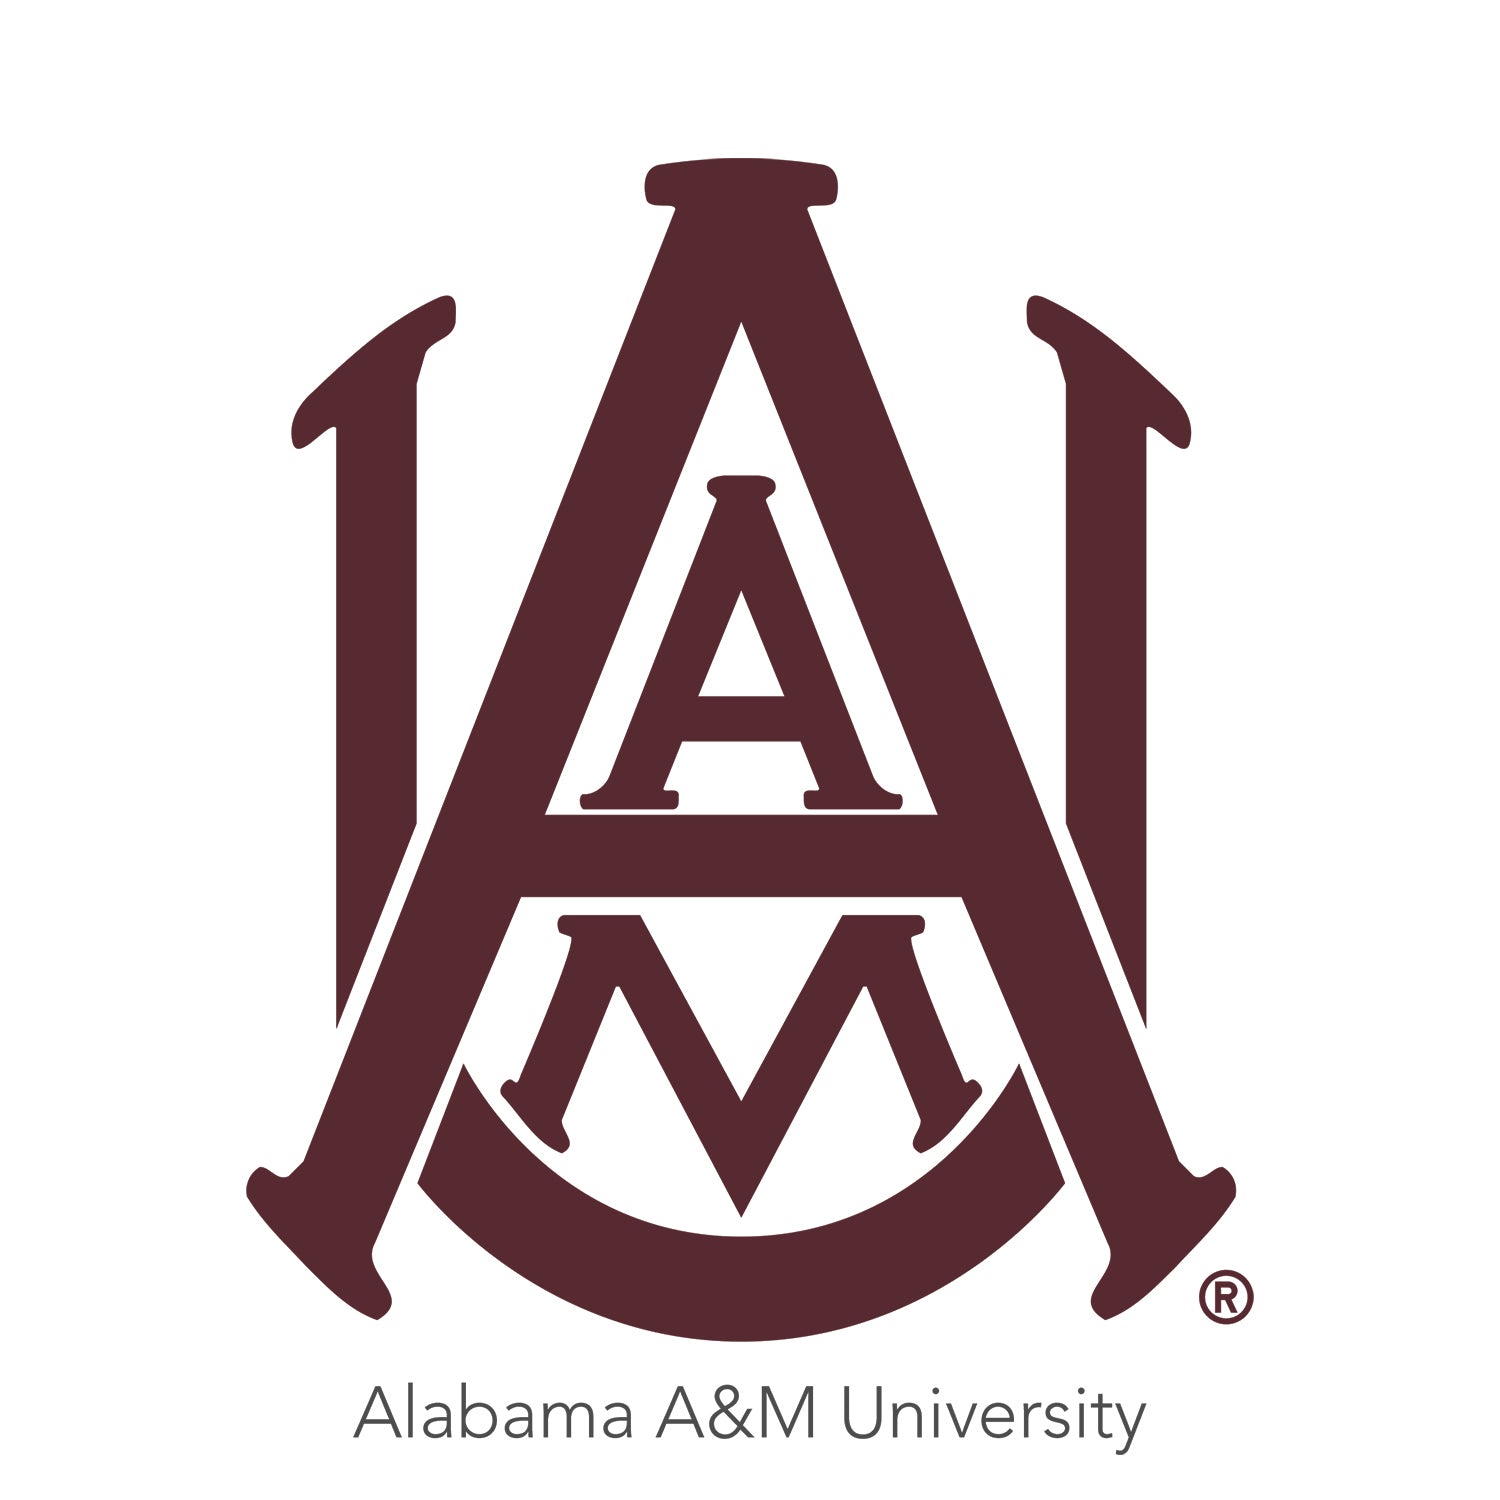 Clear bag policy in effect for Louis Crews Stadium - Alabama A&M